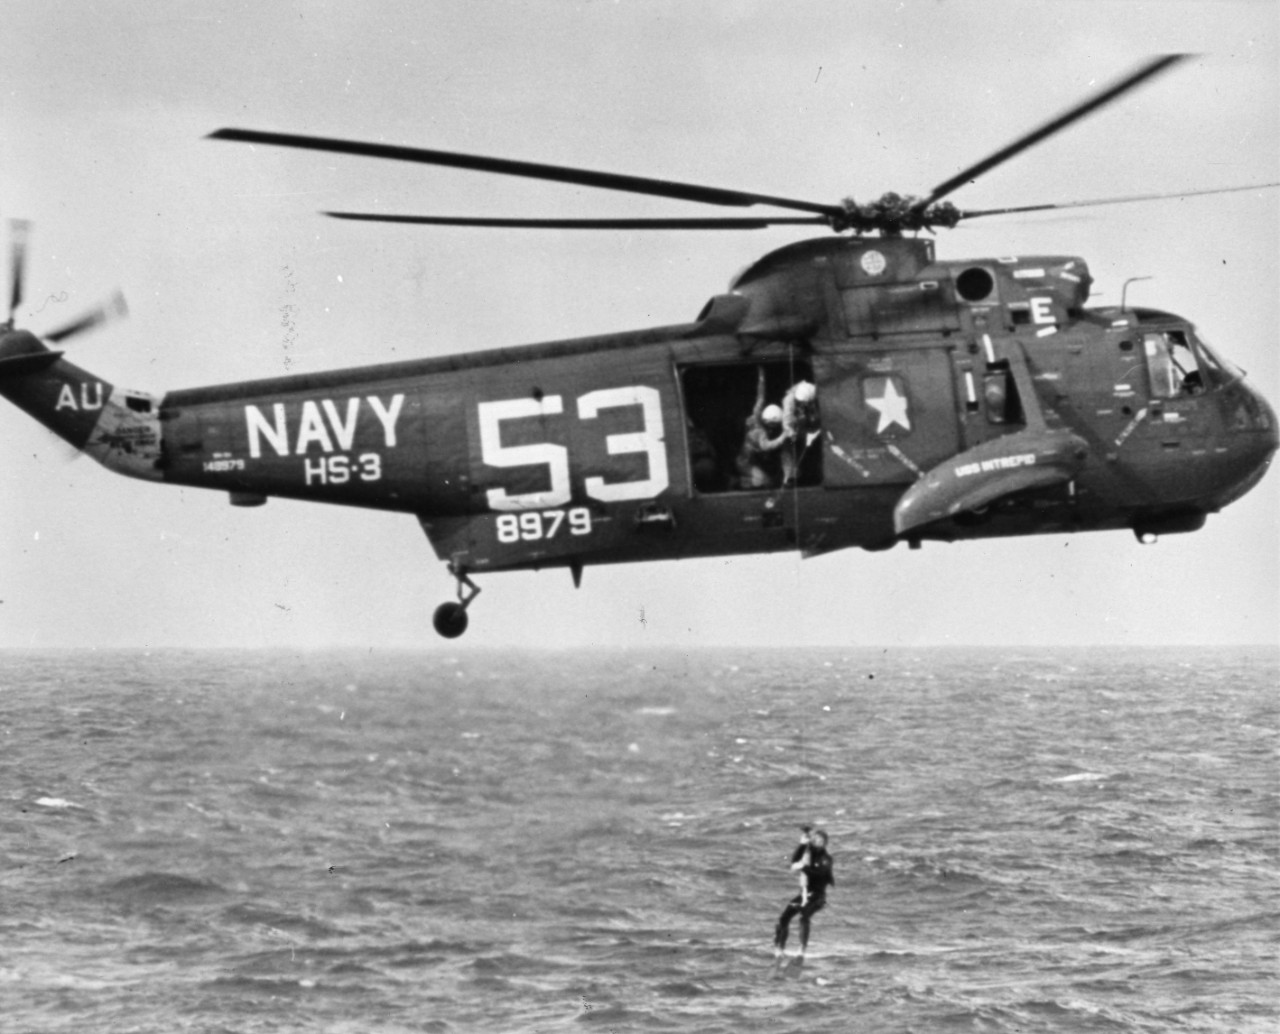 A frogman is lowered to the Gemini 3 spacecraft from a Navy helicopter of squadron HS-3. USS Intrepid (CV-11) was the prime carrier for the recovery operation for NASA's successful three orbit mission by Astronauts Grissom and Young.